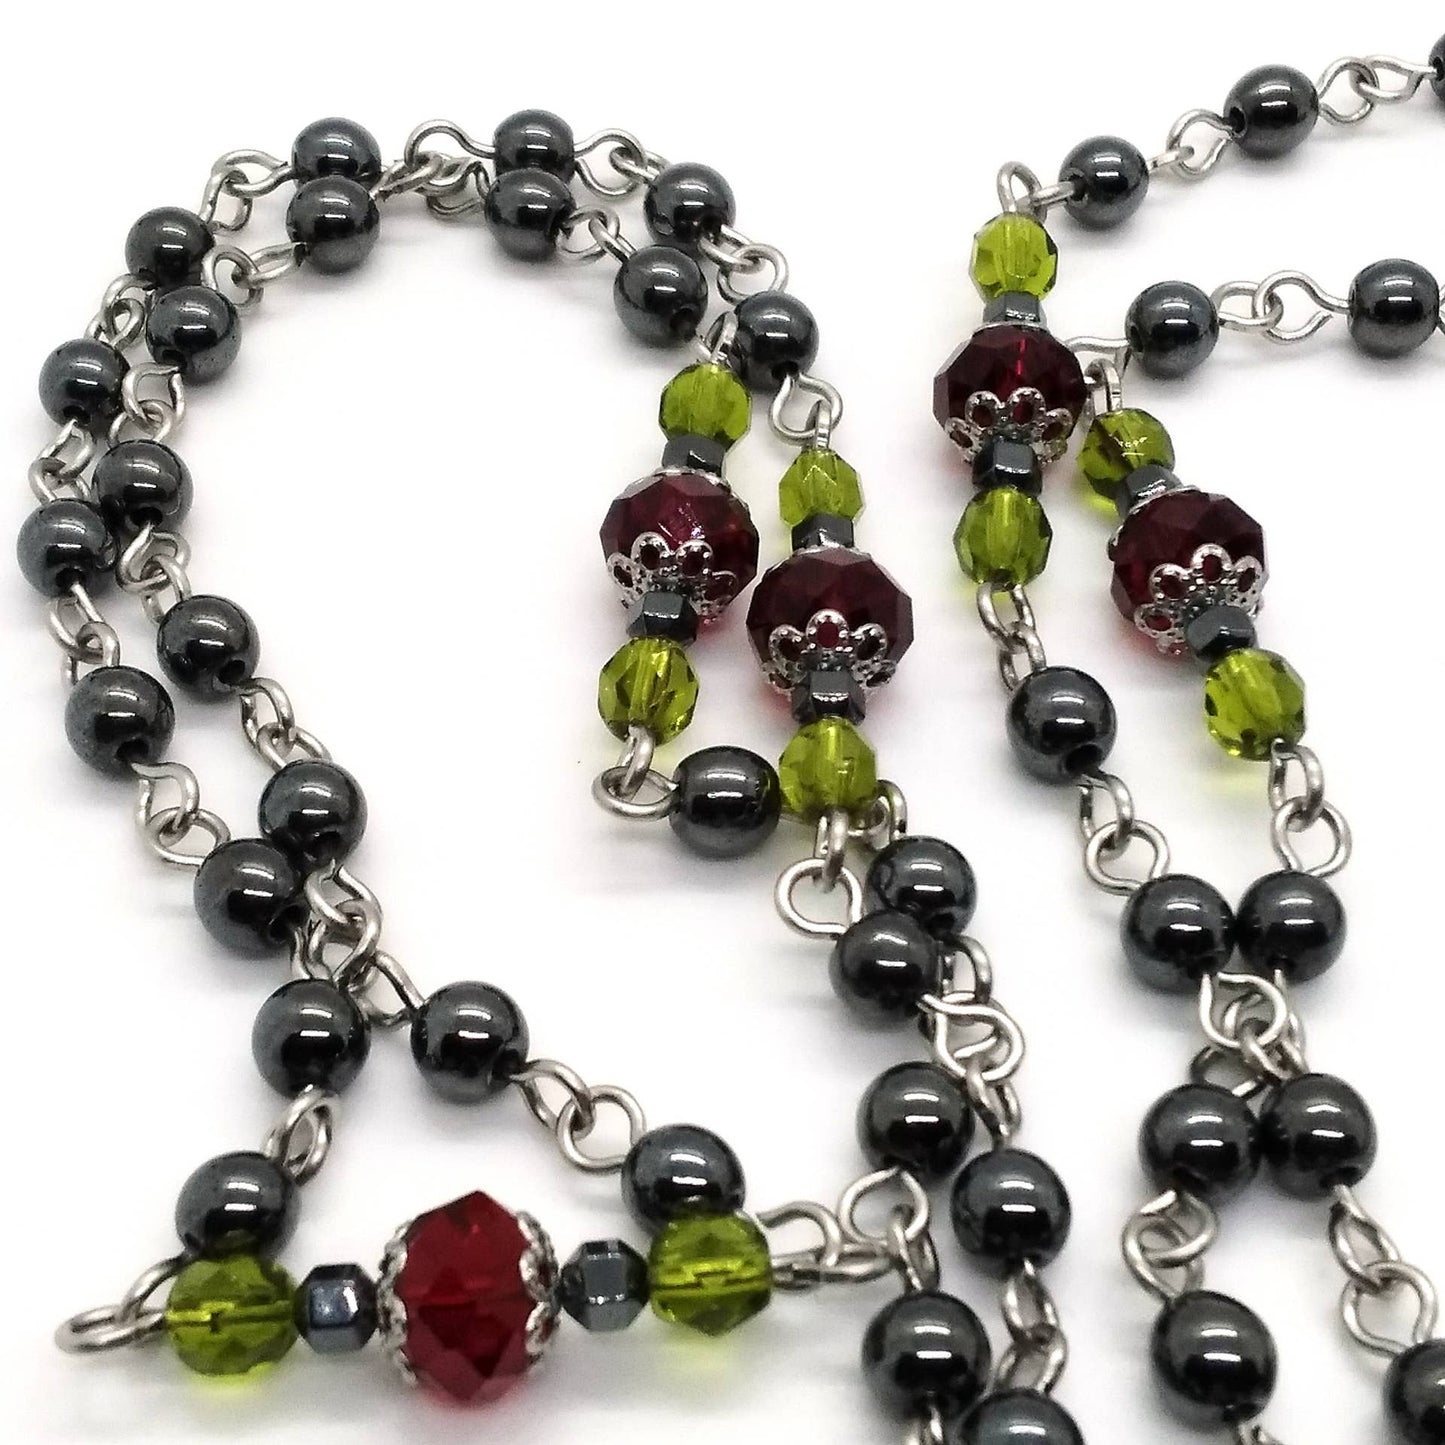 Rose Thorn Rosary